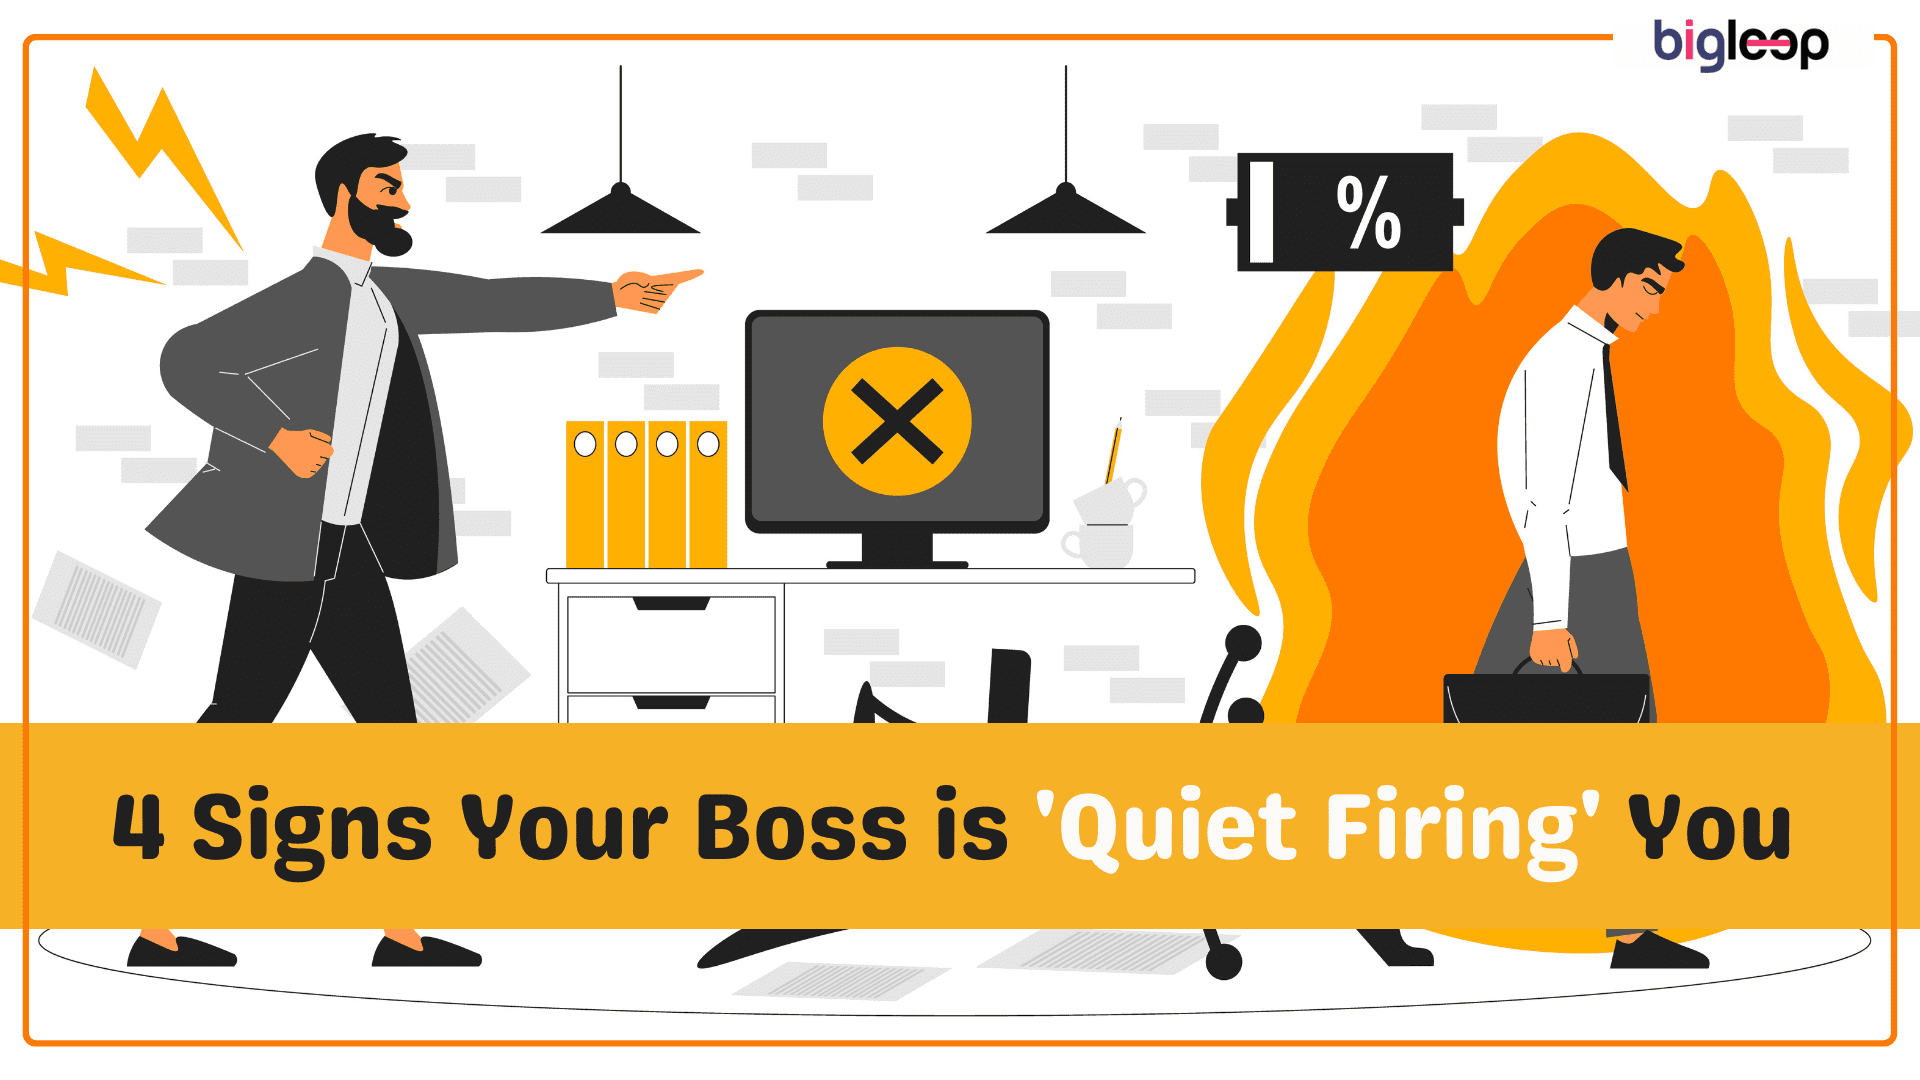 4 Signs Your Boss is 'Quiet Firing' You & the Steps You Should Take Immediately